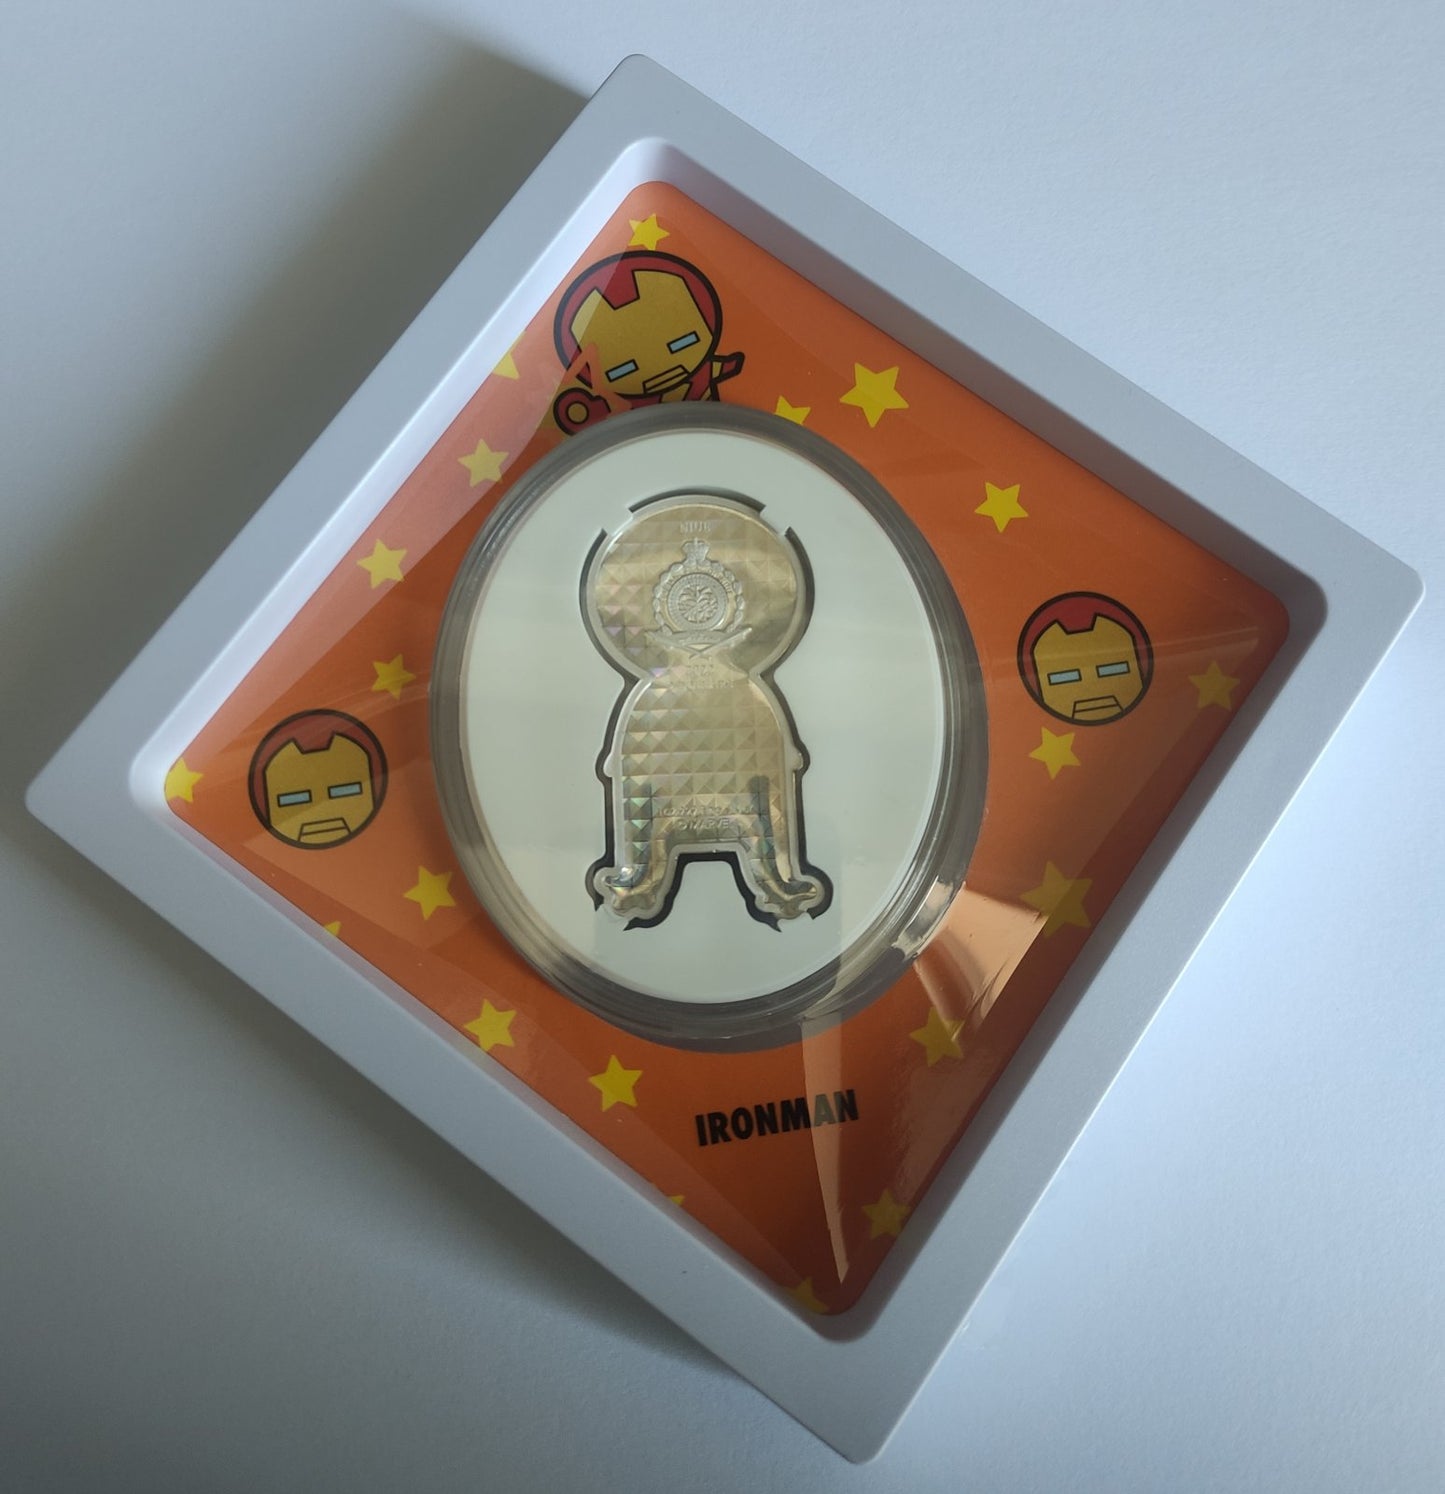 Kawaii Ironman 1 oz Silver Proof Coin in Capsule with Case, Box, and COA